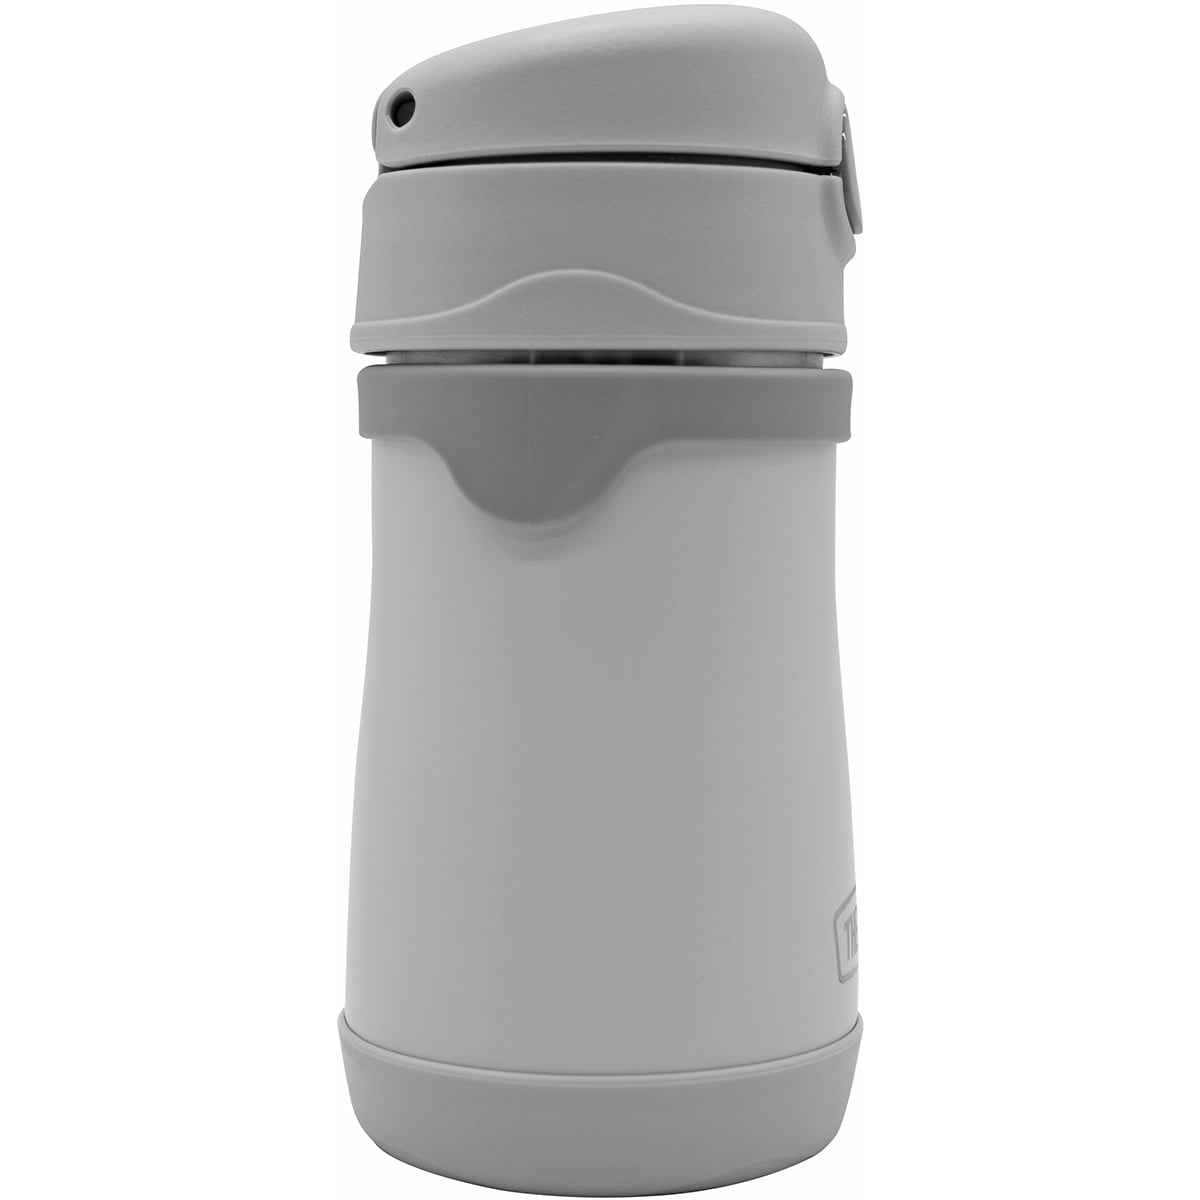 Thermos Baby 7 Oz. Vacuum Insulated Stainless Steel Sippy Cup W/ Handles -  Mint : Target